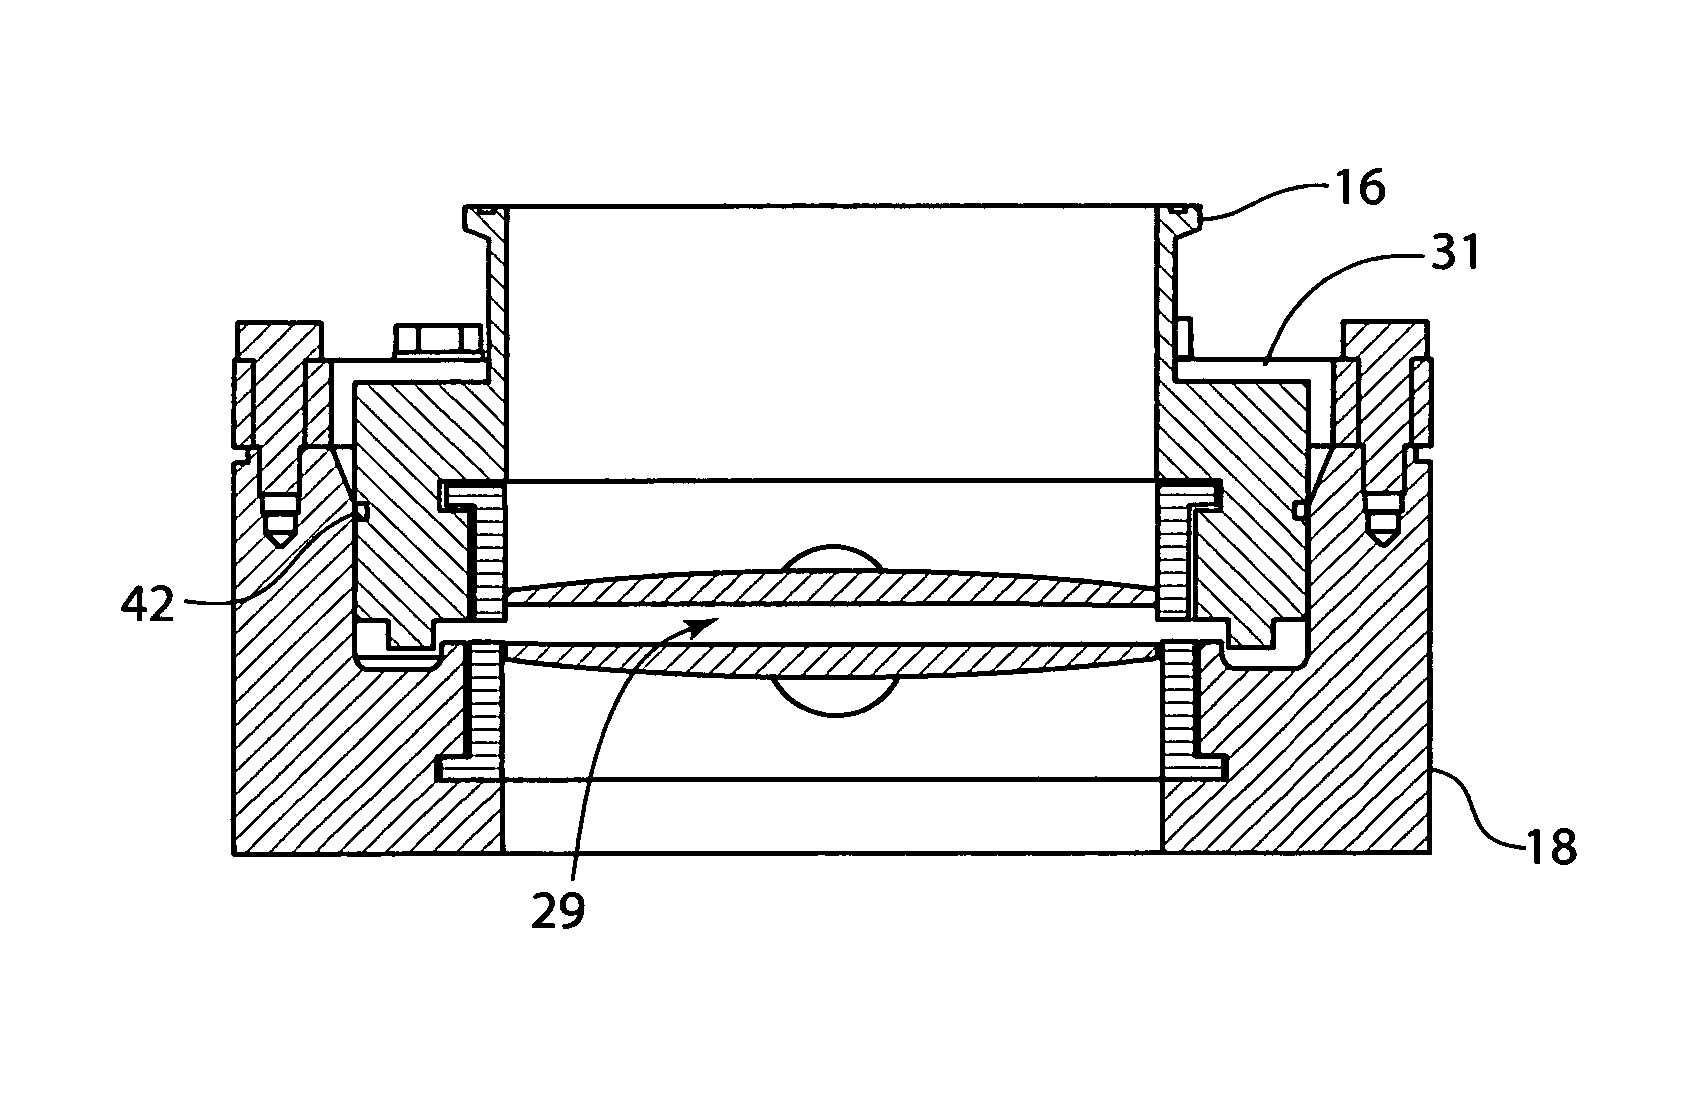 Coupling assembly with sterilizing chamber